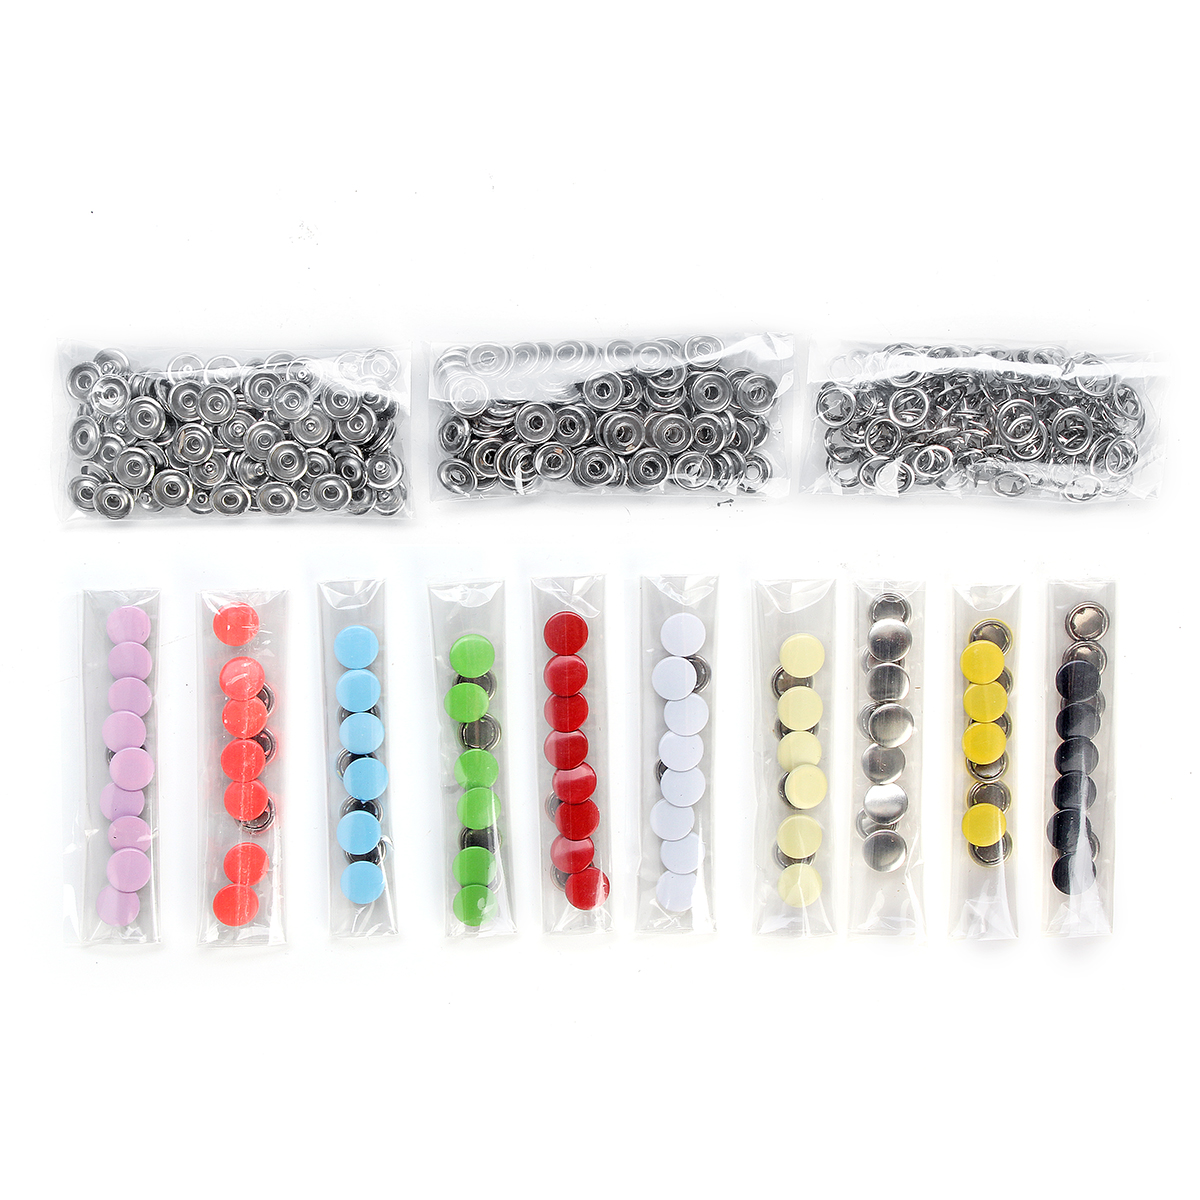 

100 Sets 9.5mm 10 Colors Metal Prong Ring Buttons Press Studs Sewing Craft Fasteners Snap Craft Tool Buttons For Clothes